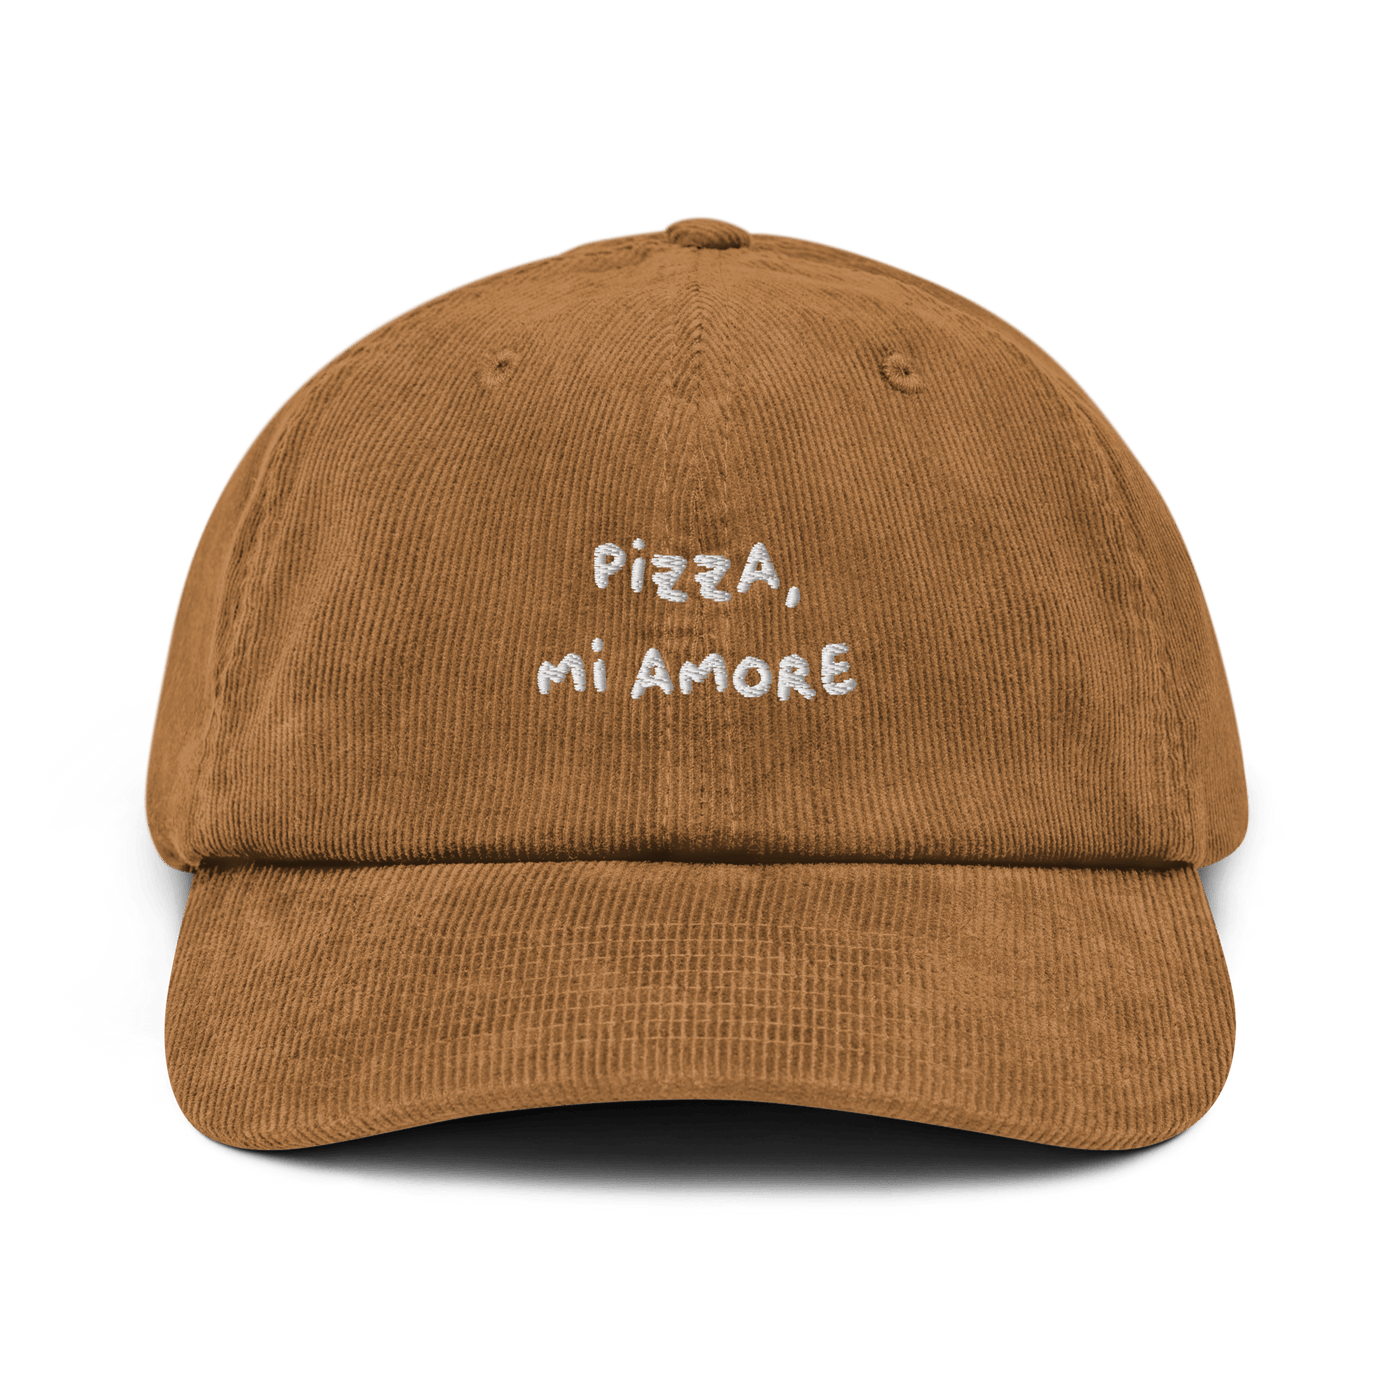 Pizza Mi Amore Corduroy hat - Camel - - Just Another Cap Store